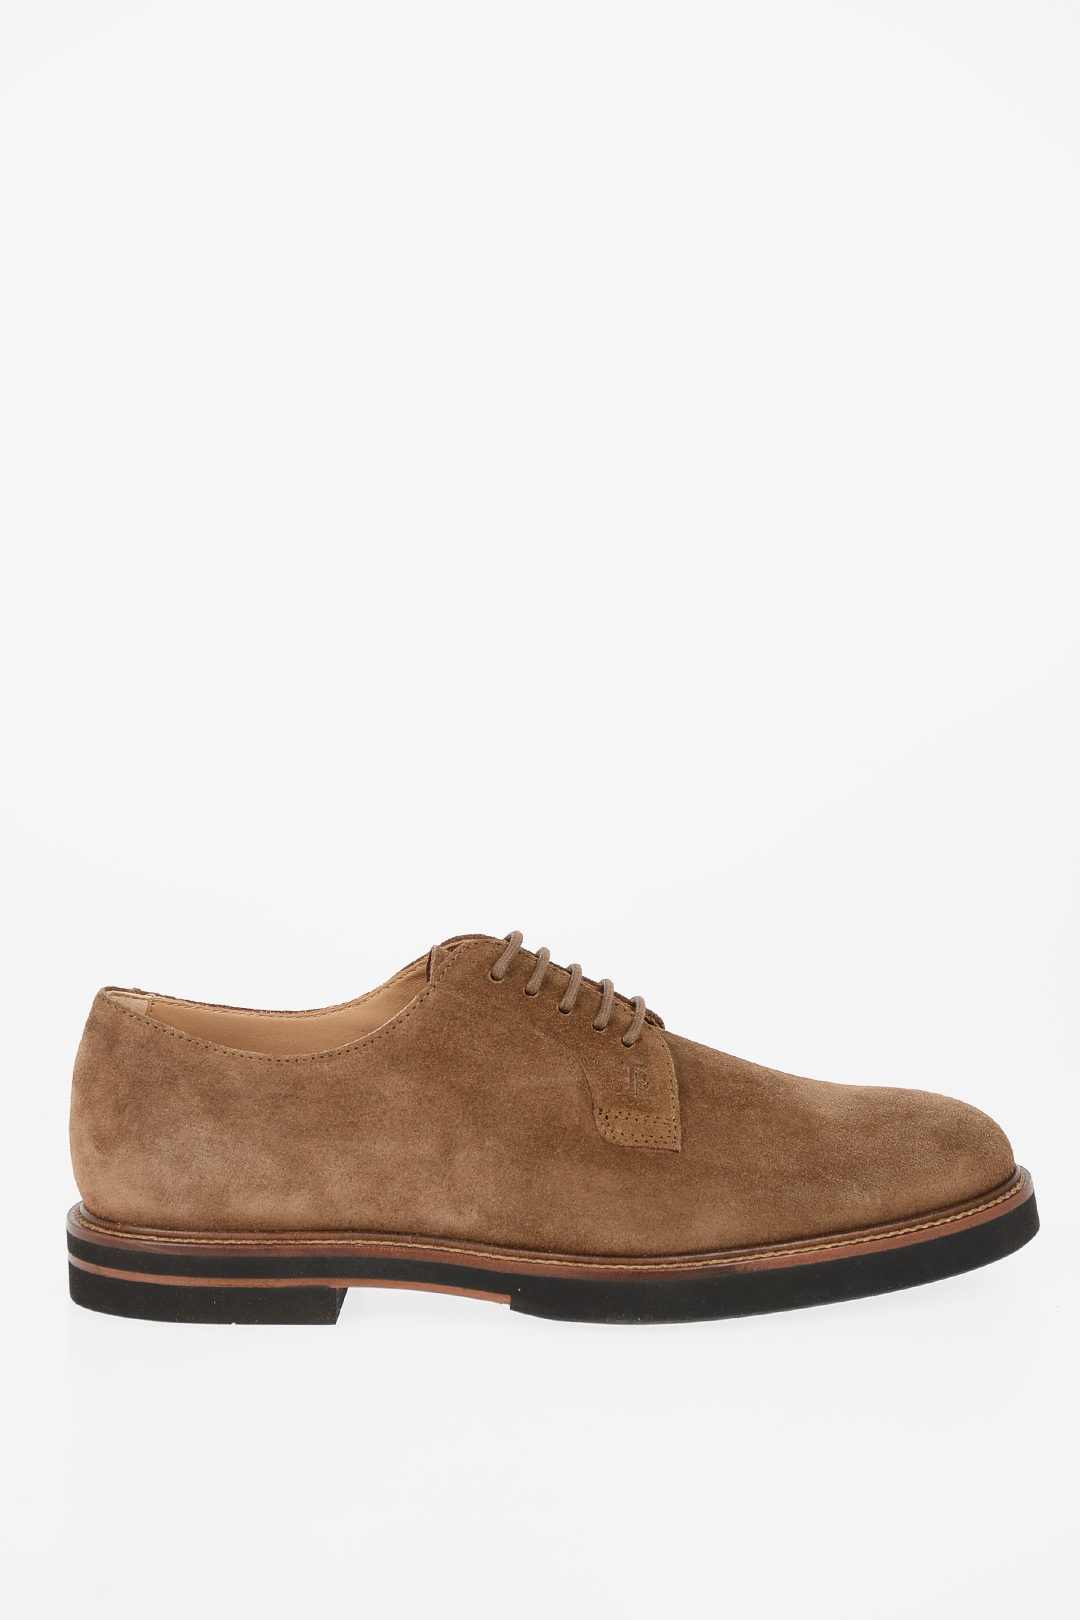 Tod's Suede leather Derby shoes men - Glamood Outlet